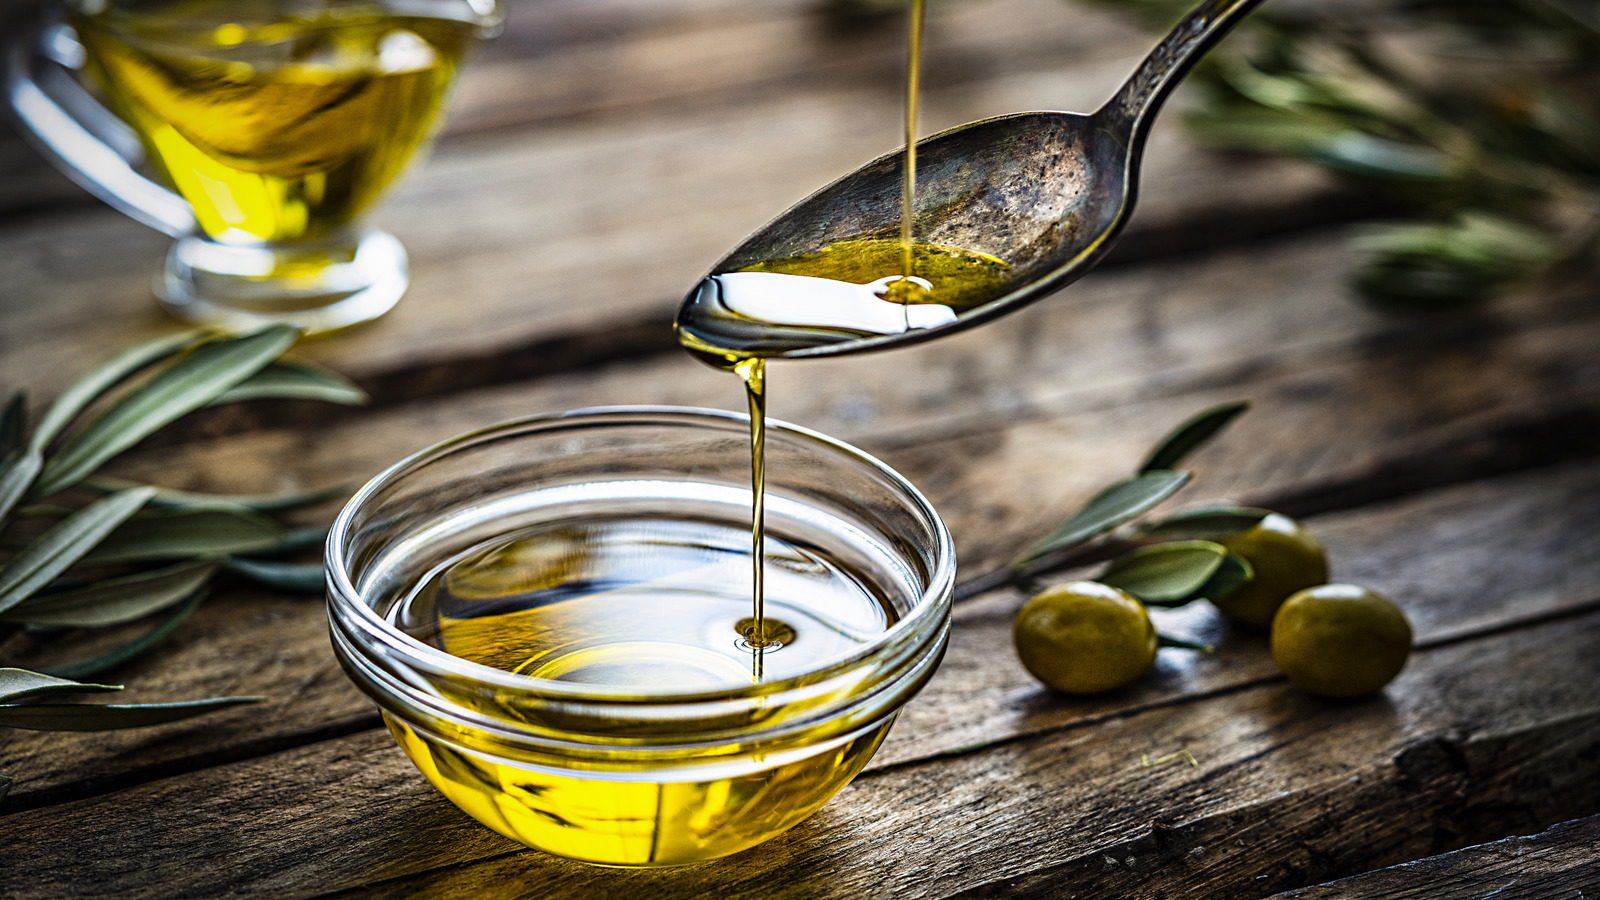 Why Green Olives Are Preferred For Making Olive Oil - Chowhound